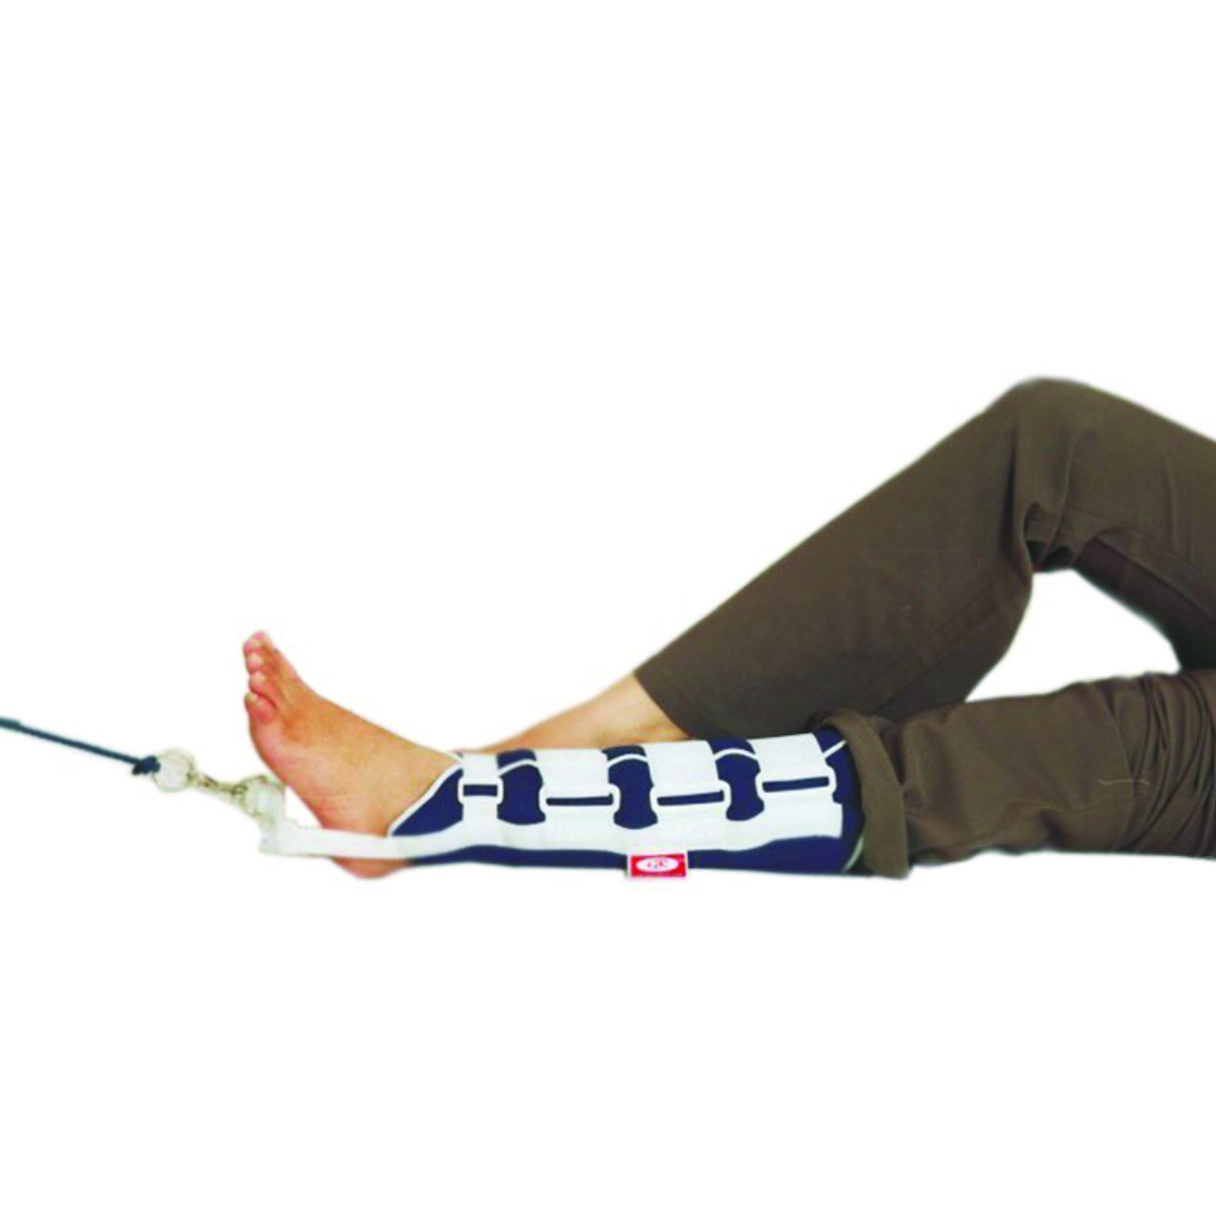 Skin Traction with Ankle Spreader Bar - Grip Rehabilitation